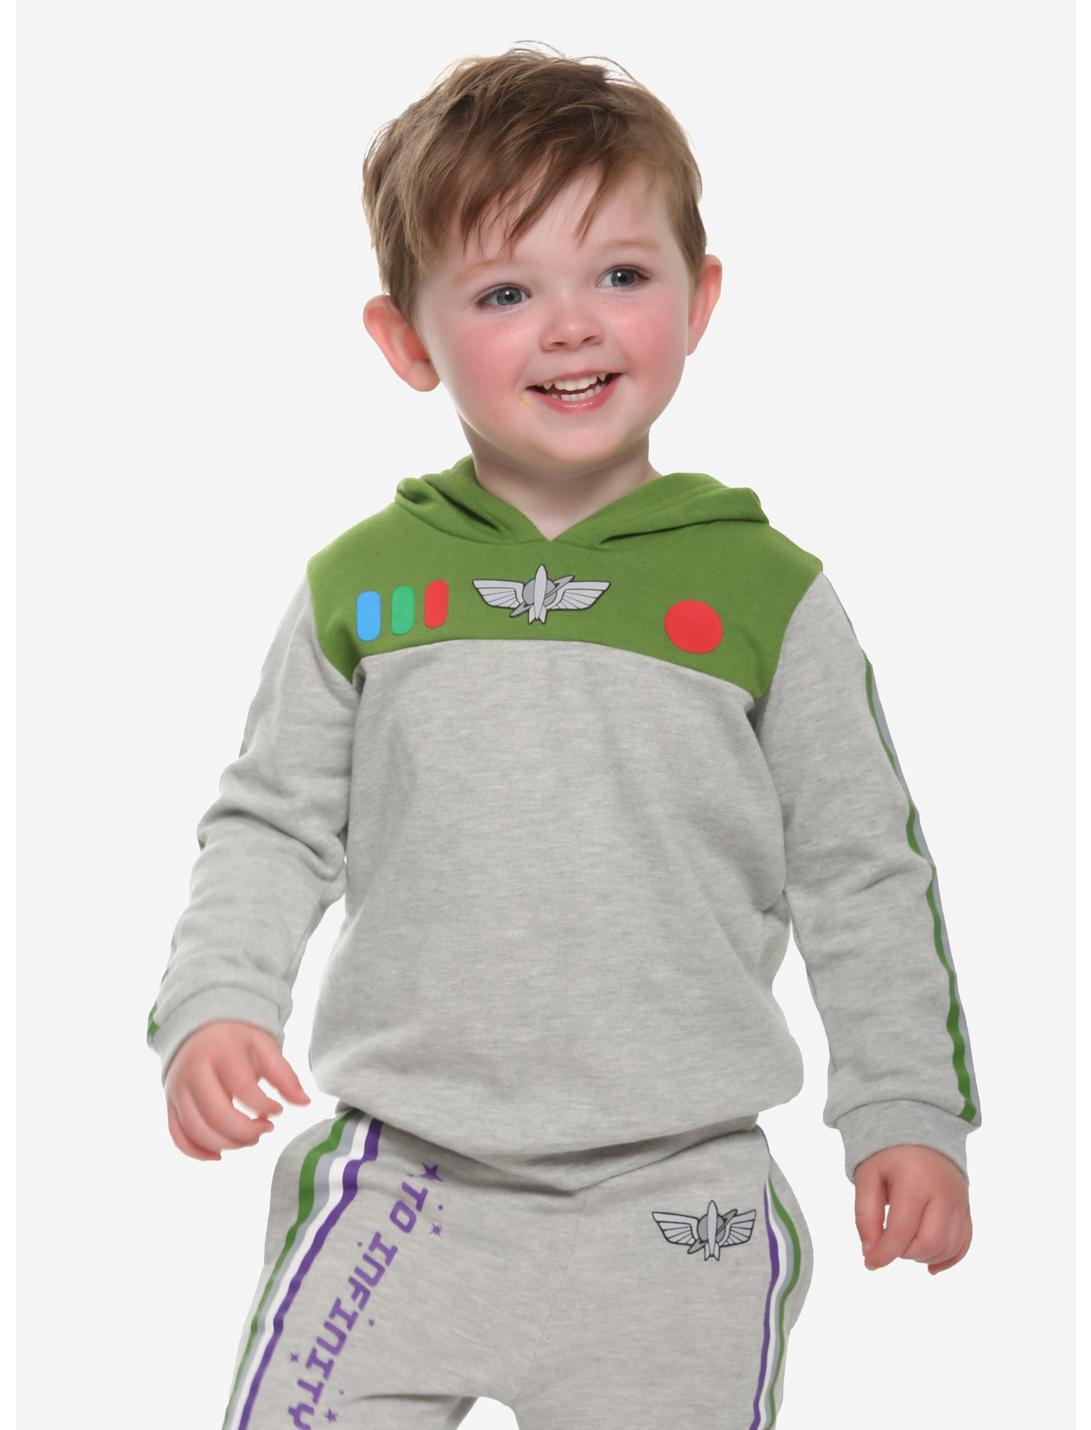 Plus Size Disney Pixar Toy Story Buzz Lightyear Toddler Hoodie - BoxLunch Exclusive, MULTI, hi-res